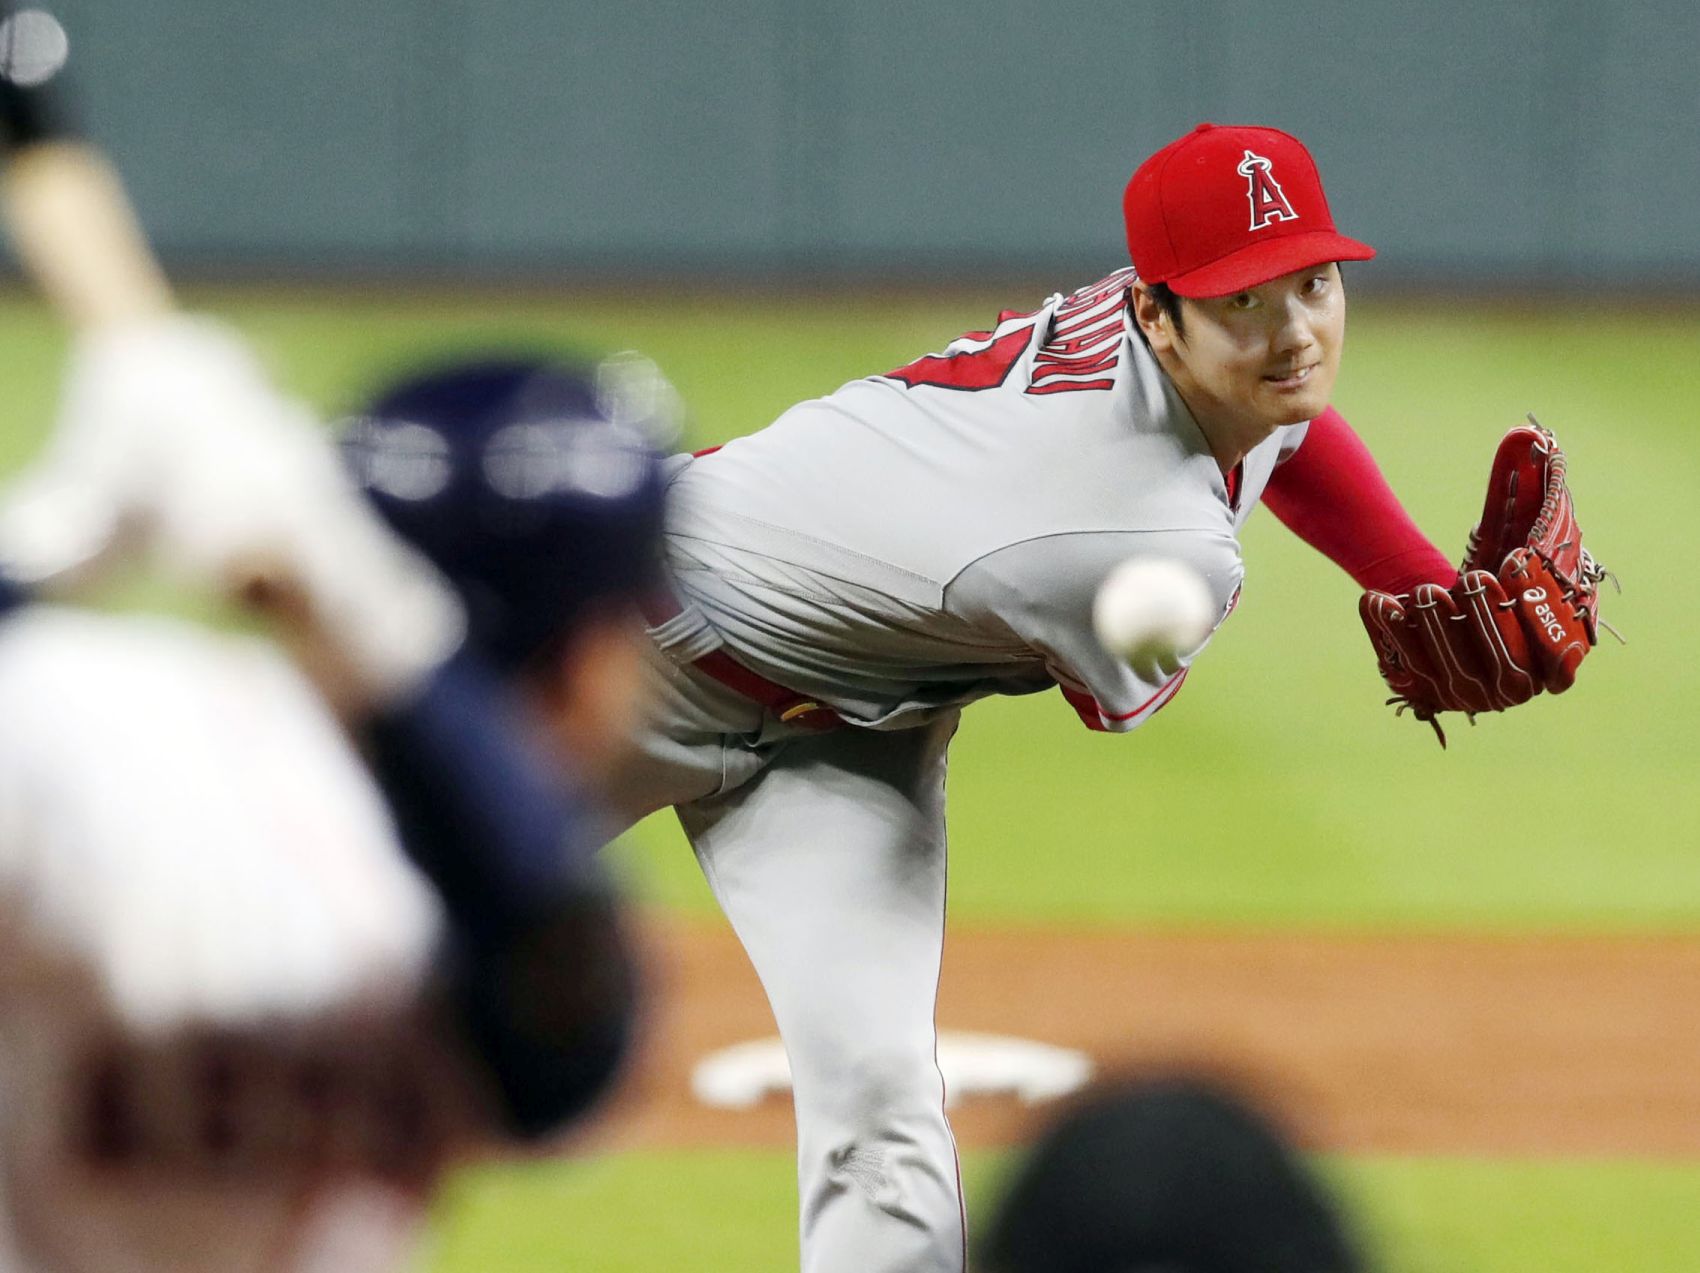 Los Angeles Angels Shohei Ohtani officially not pitching in 2019